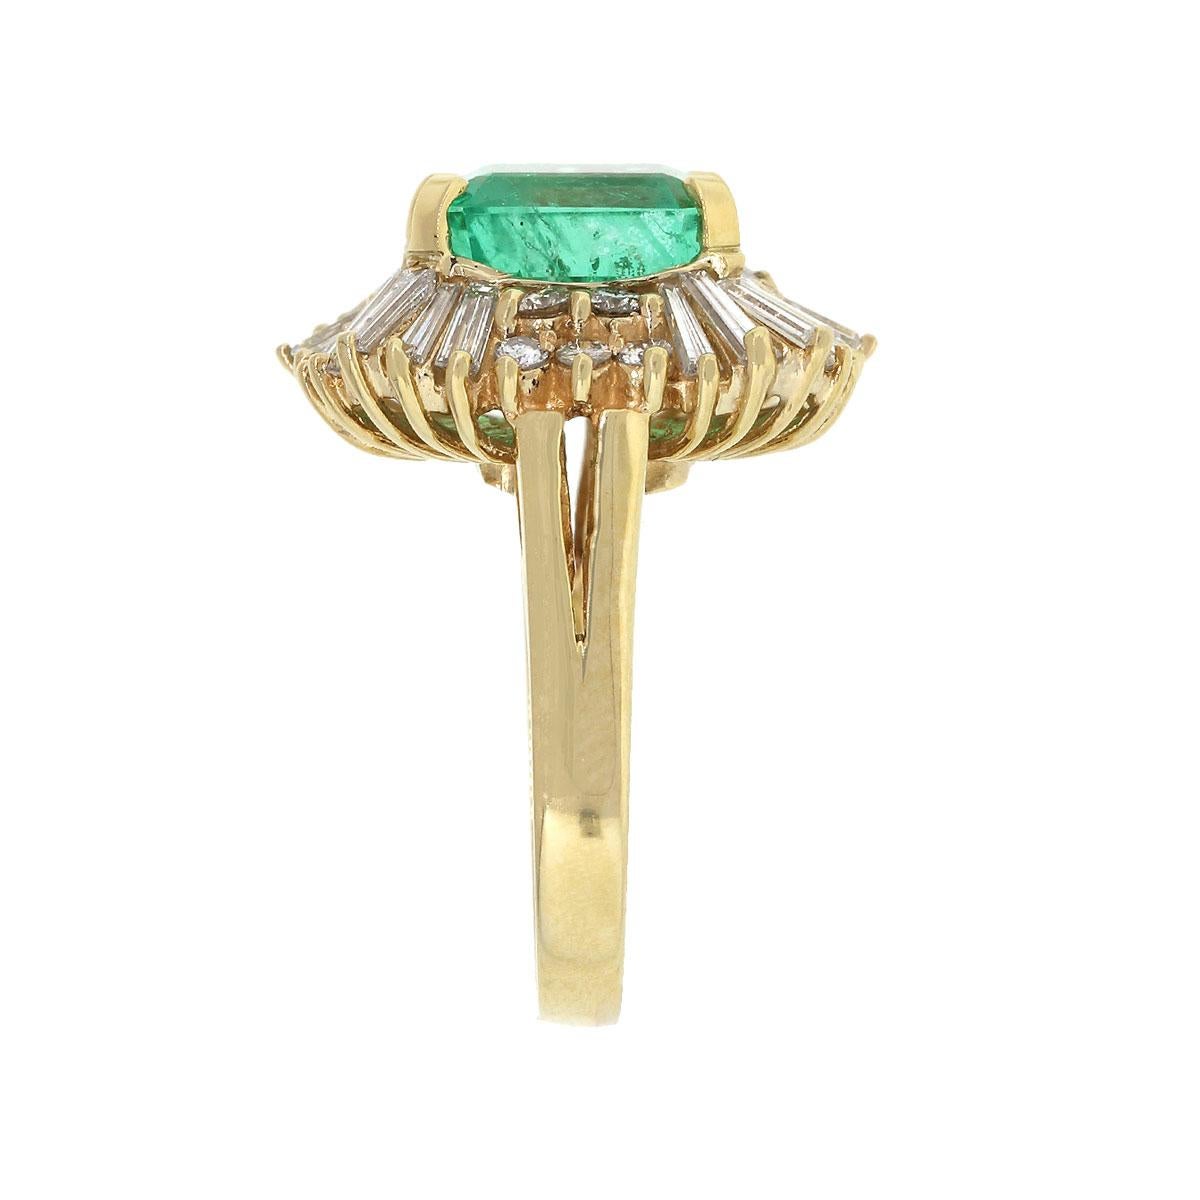 Material: 14k Yellow Gold
Diamond Details: Approximately 2.40ctw of baguette and round diamonds. Diamonds are G/H in color and VS in clarity.
Gemstone Details: Approximately 6ctw emerald gemstone
Ring Size: 7.75
Ring Measurements: 0.70″ x 0.80″ x